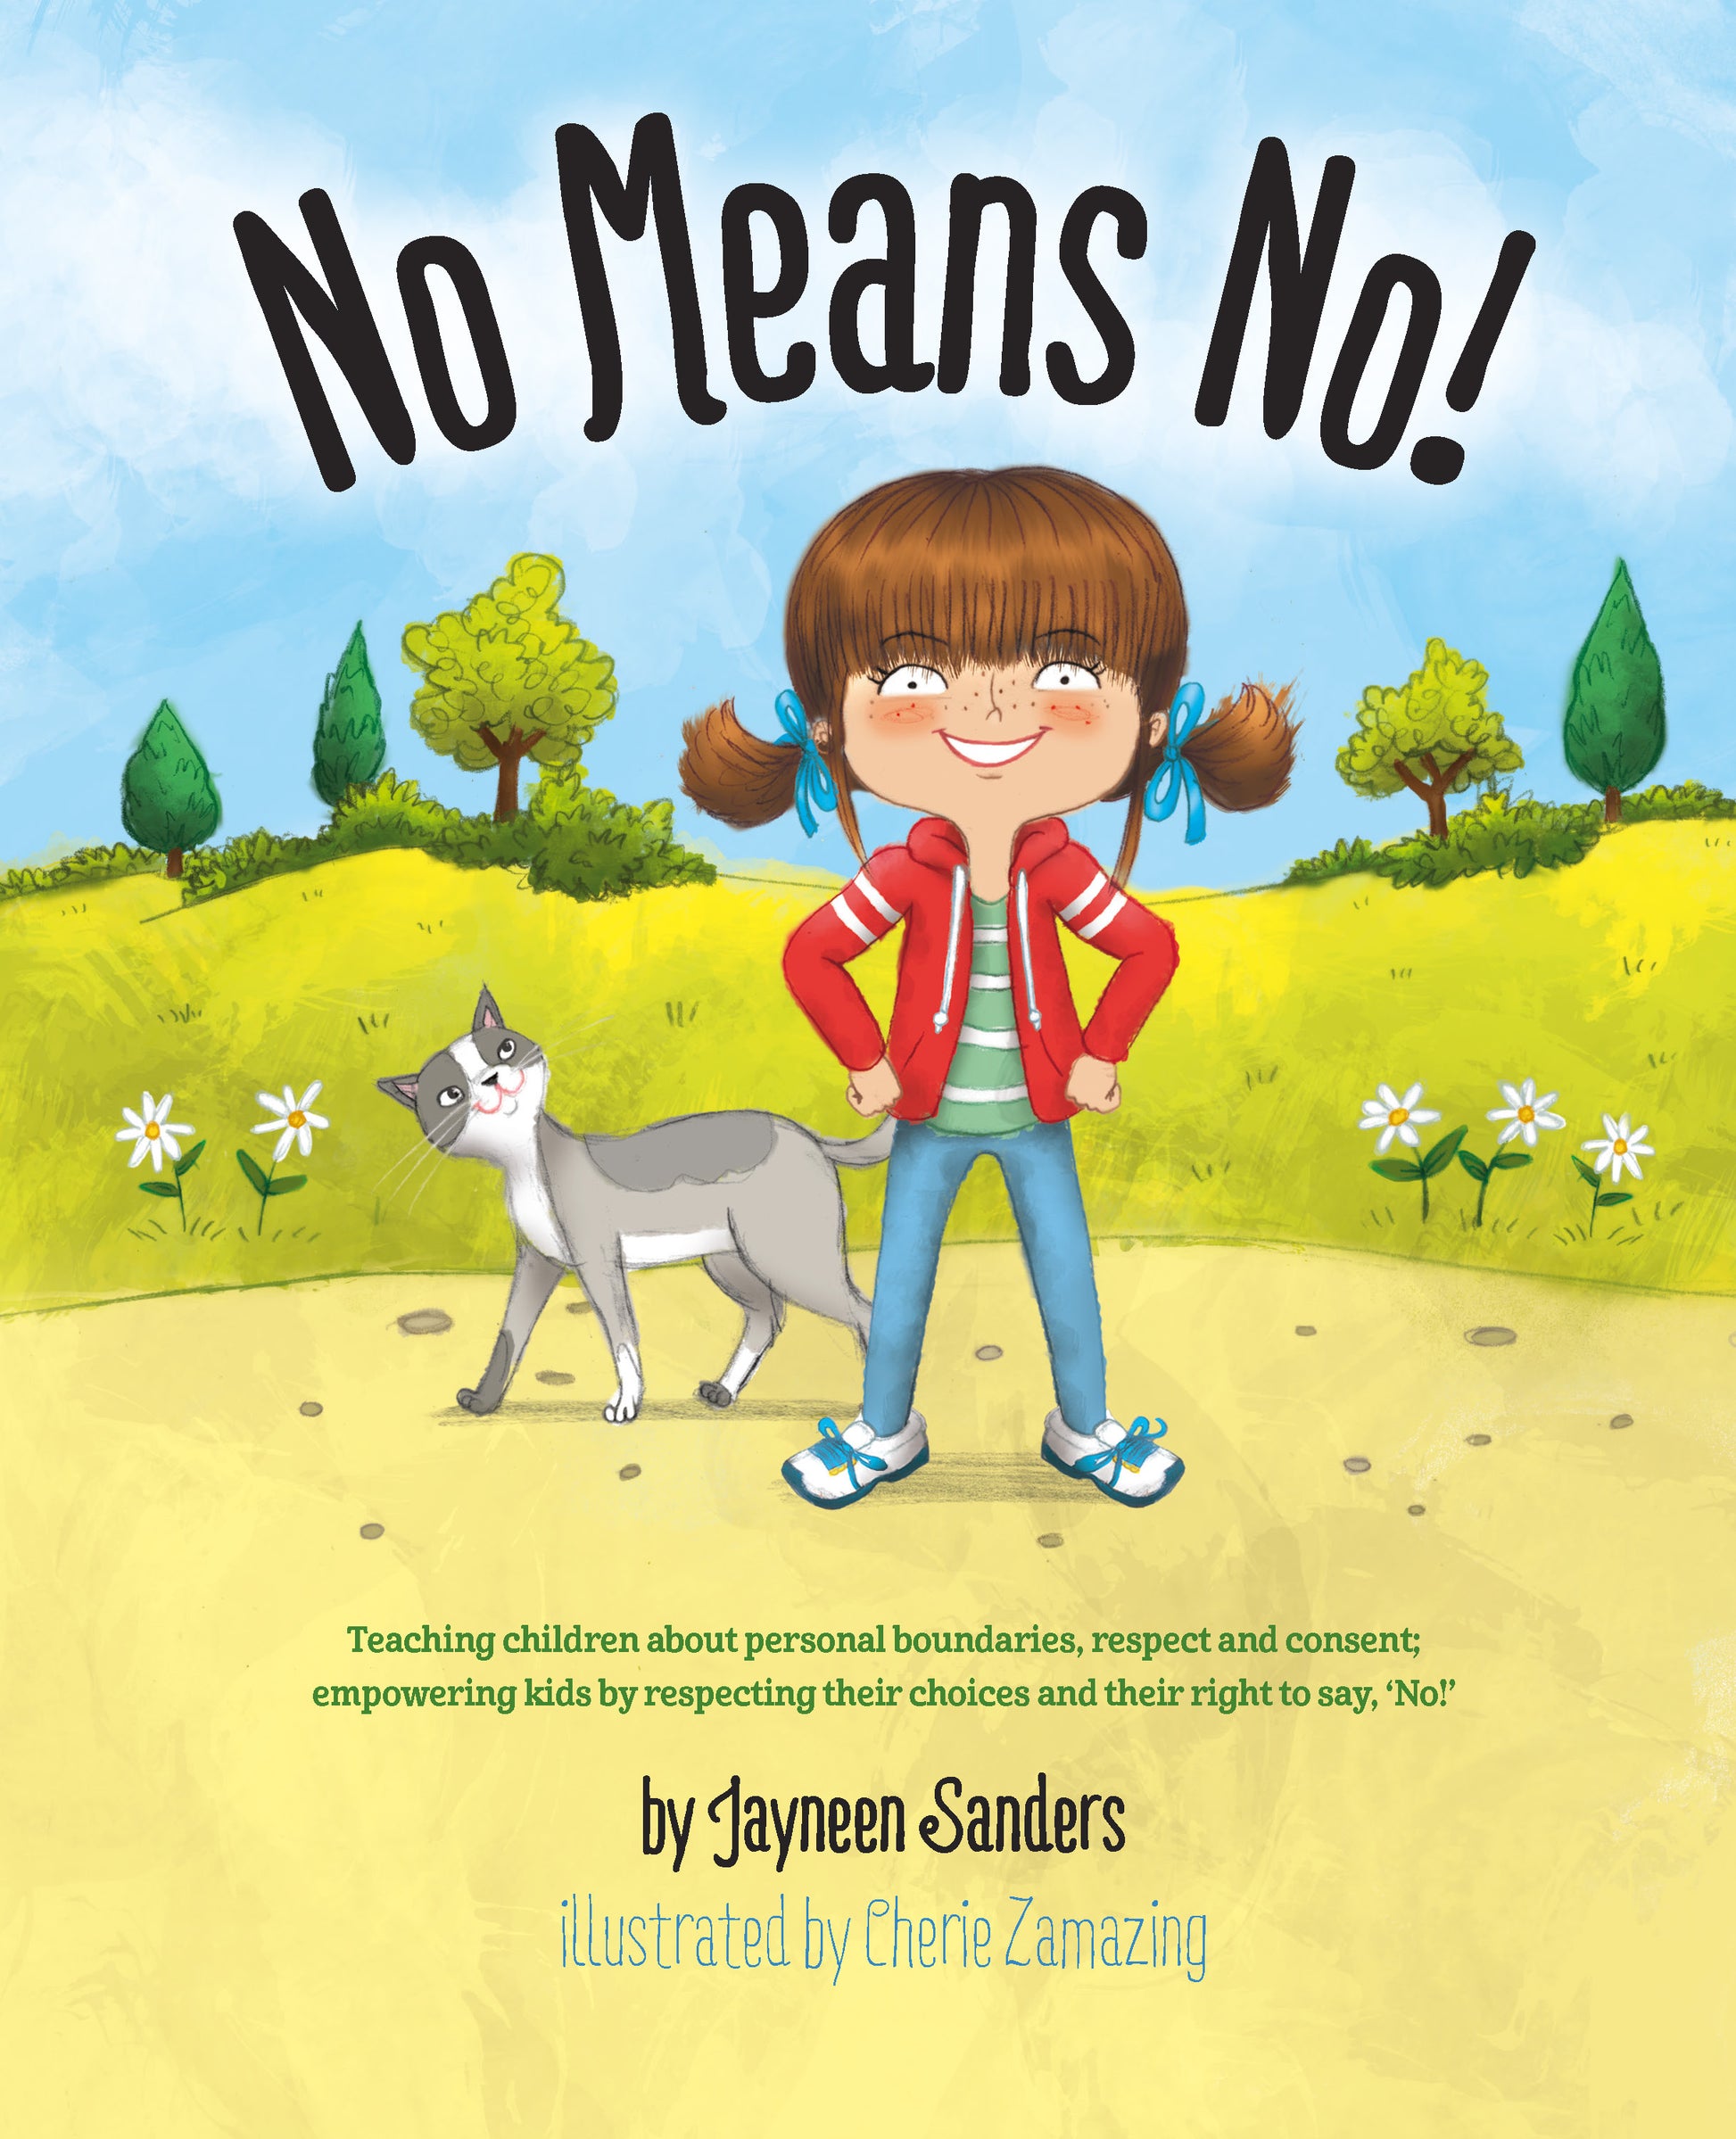 The cover of the book ‘No Means No!’ by Jayneen Sanders.